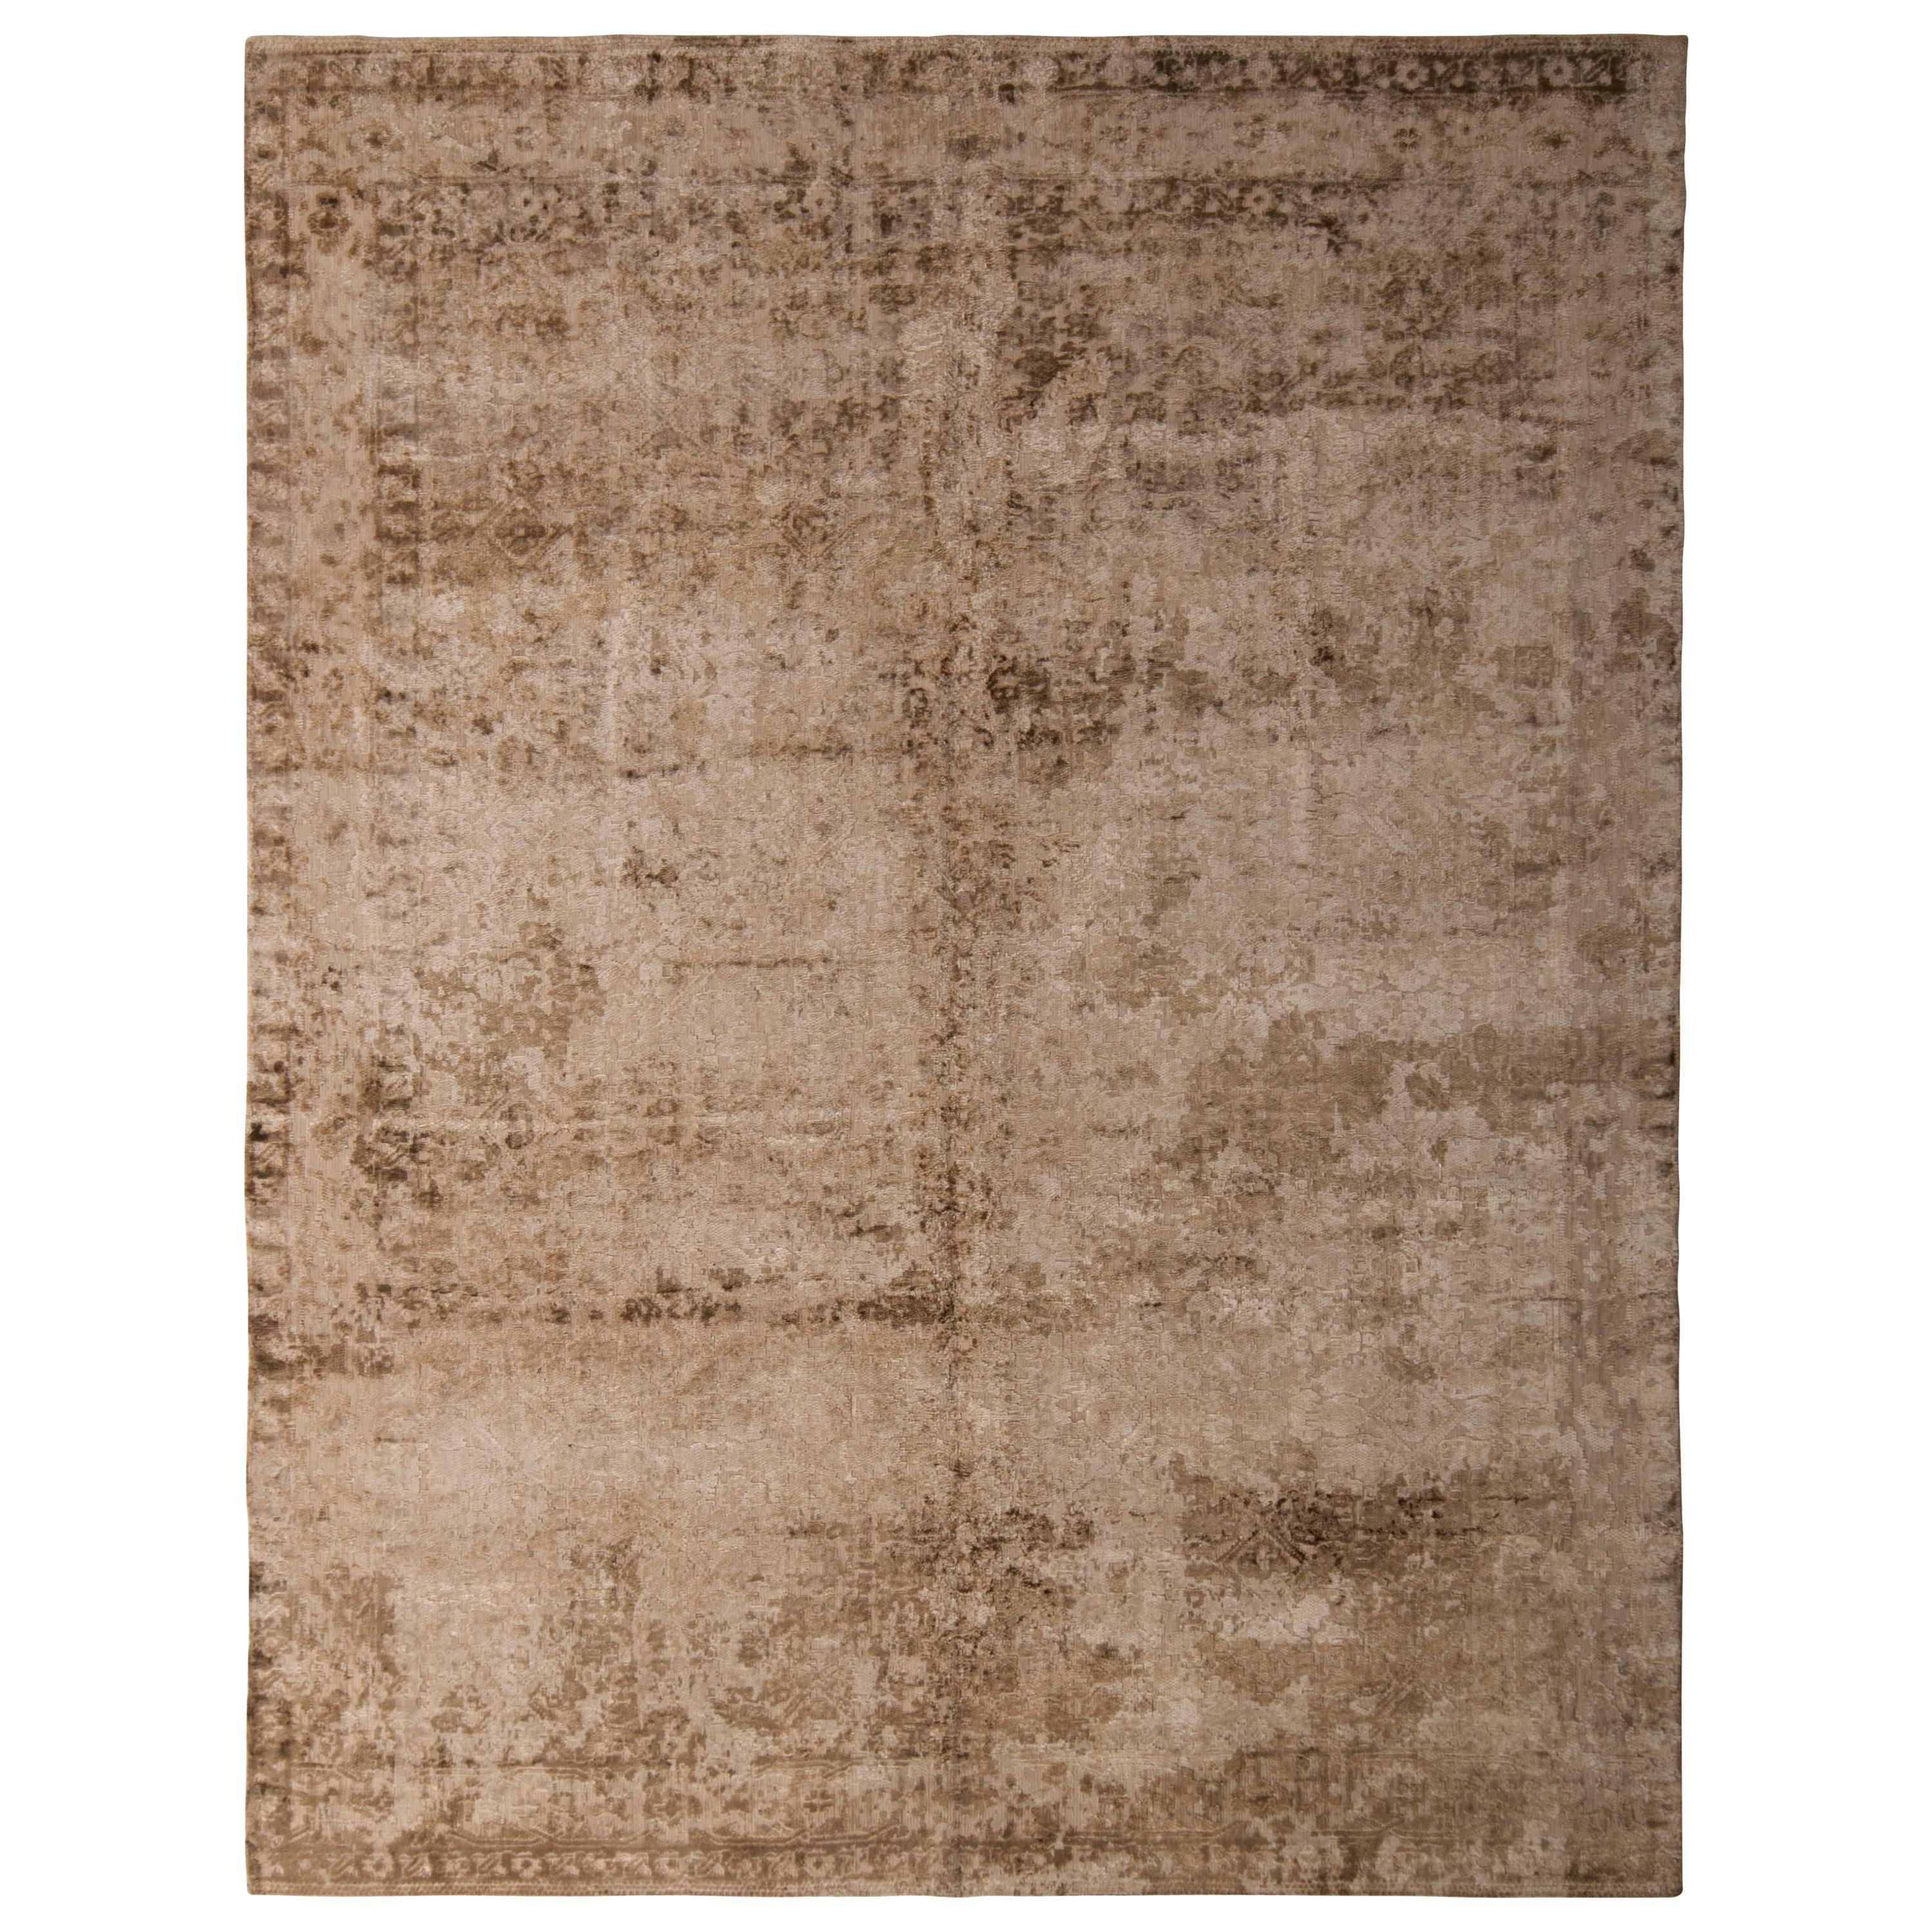 Rug & Kilim 's Hand Knotted Traditional Silk Rug Beige Brown Herati Pattern For Sale